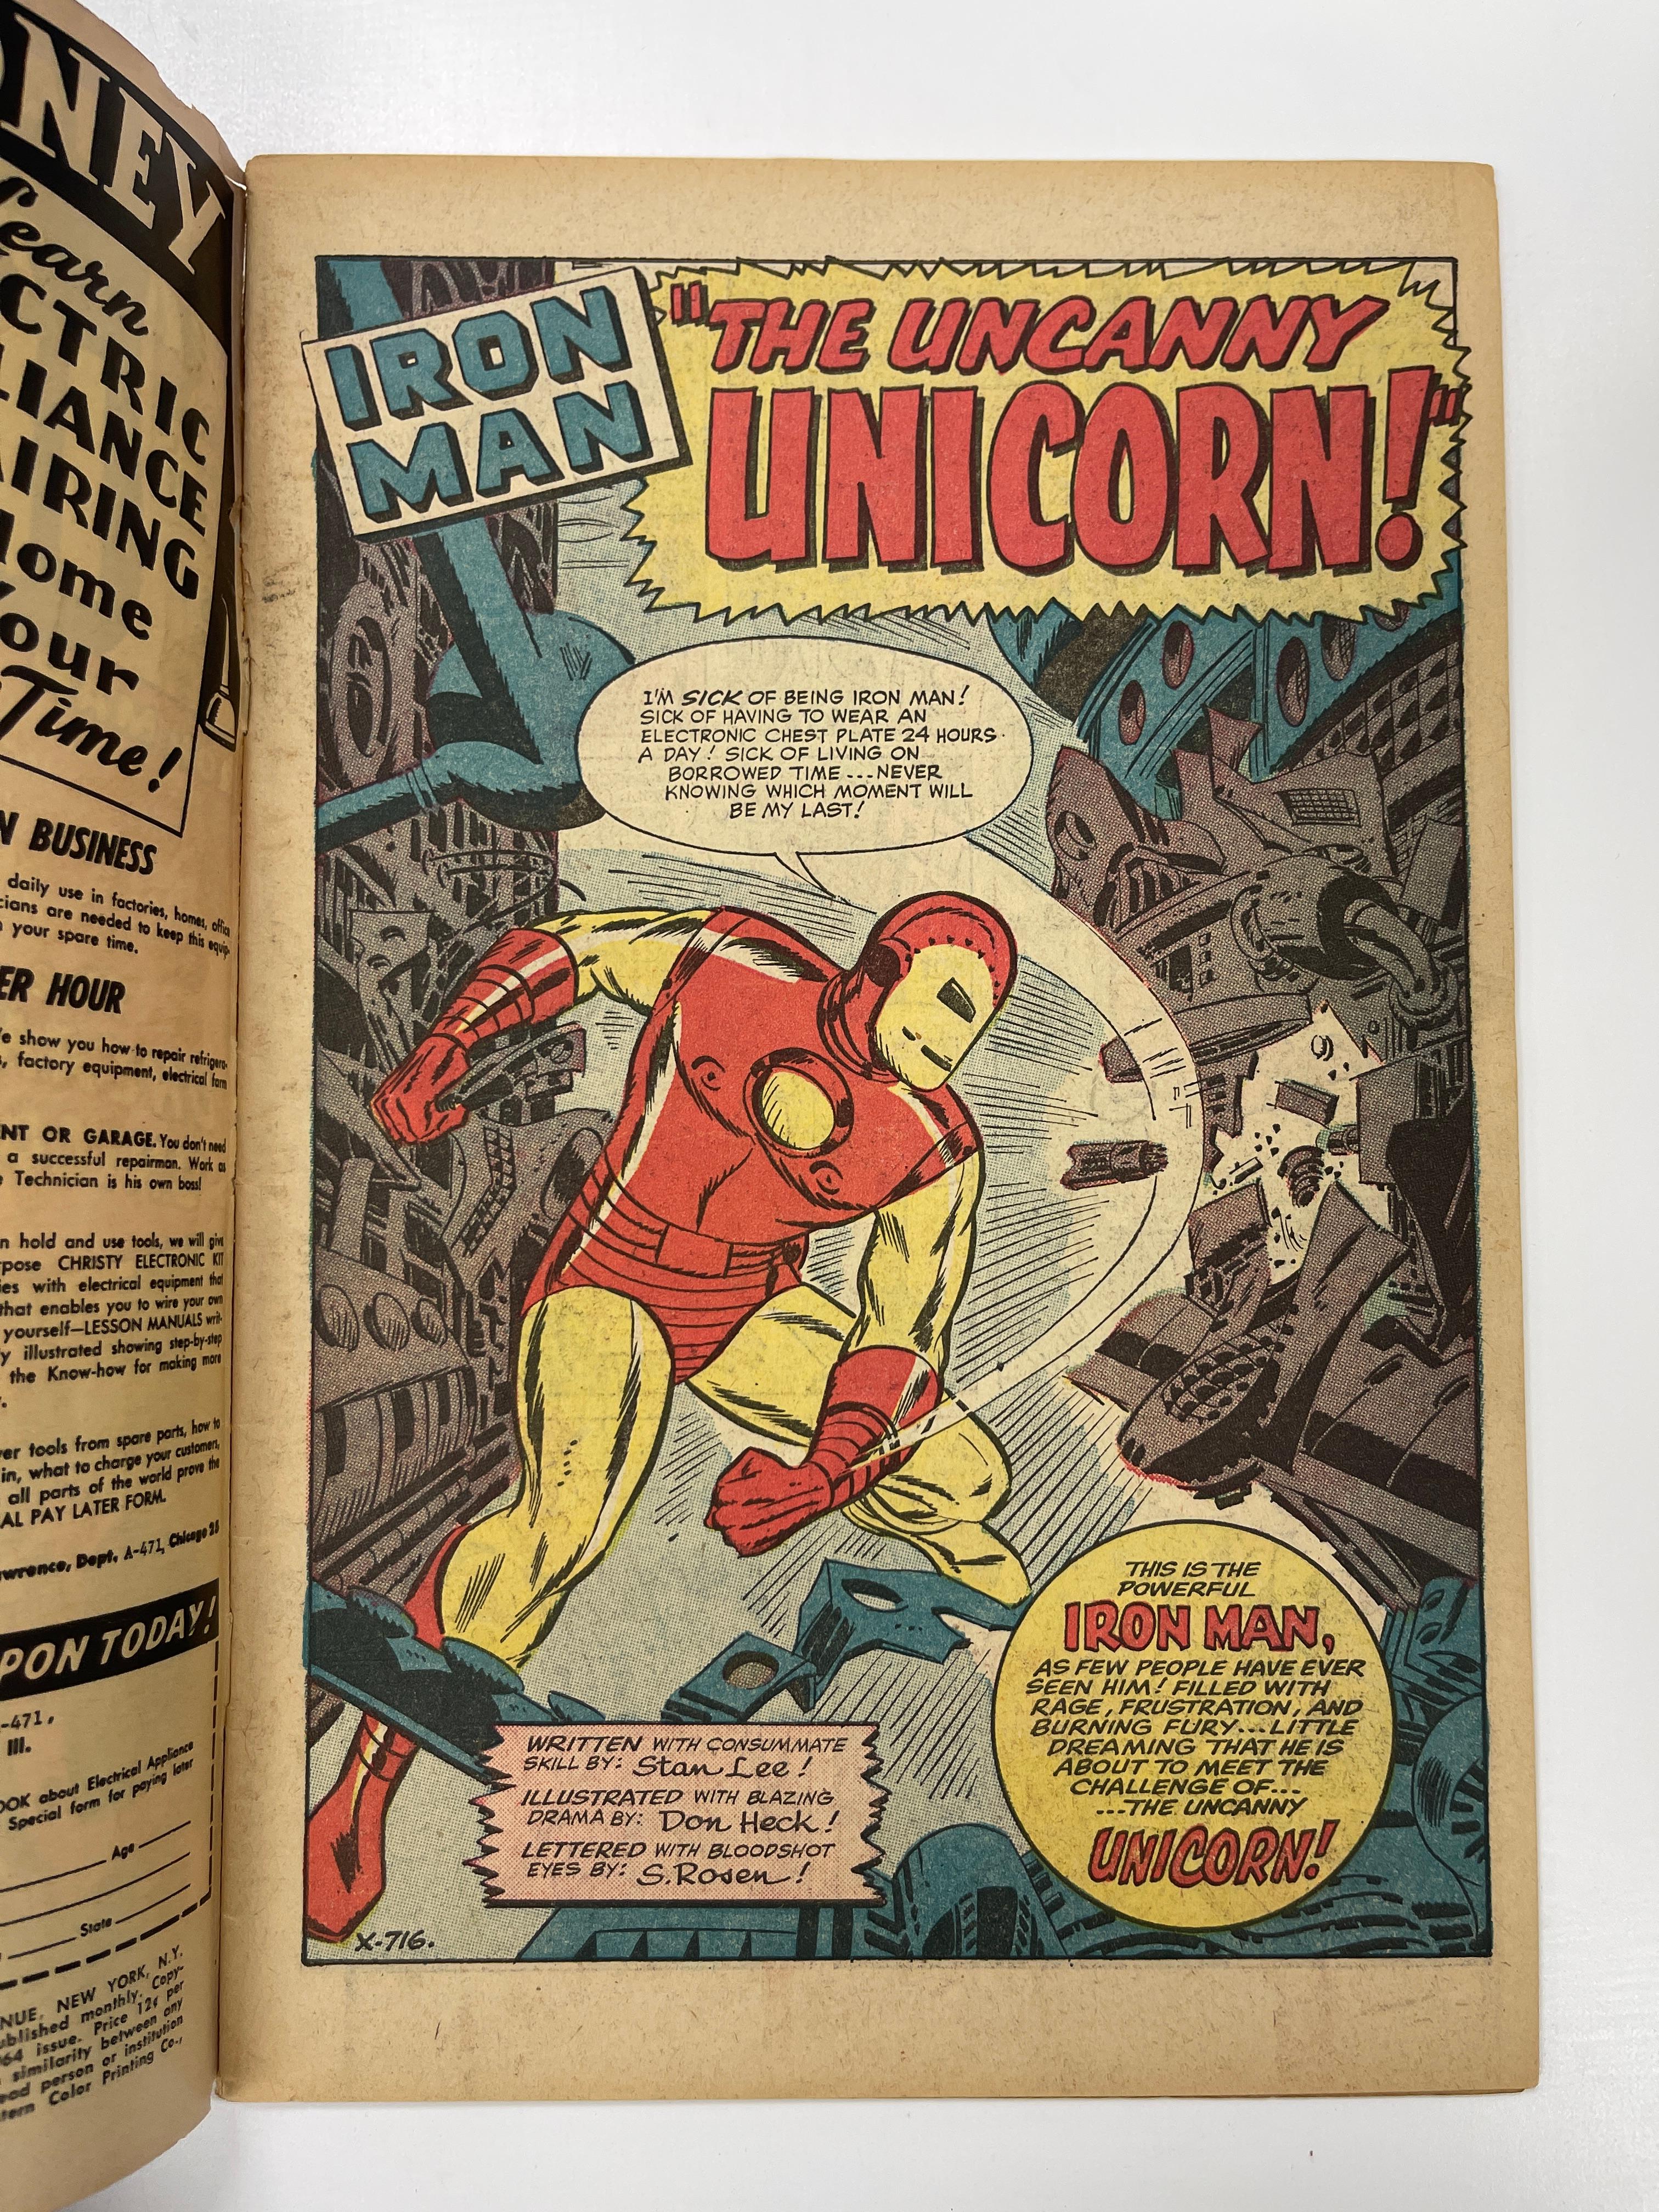 TALES OF SUSPENSE #56 (1964)  MARVEL 1ST APPEARANCE OF THE UNICORN